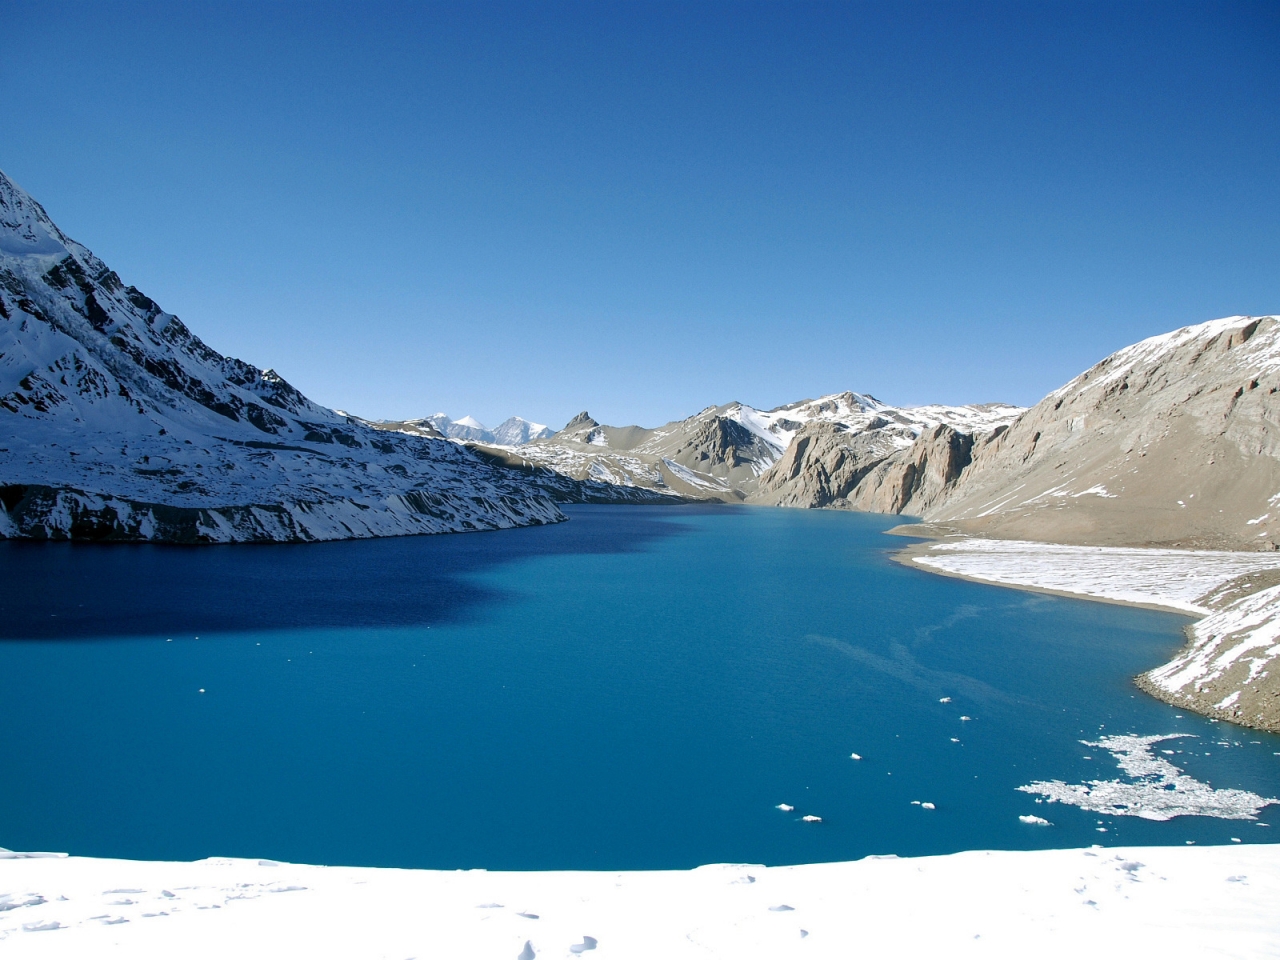 Tilicho Lake View for 1280 x 960 resolution